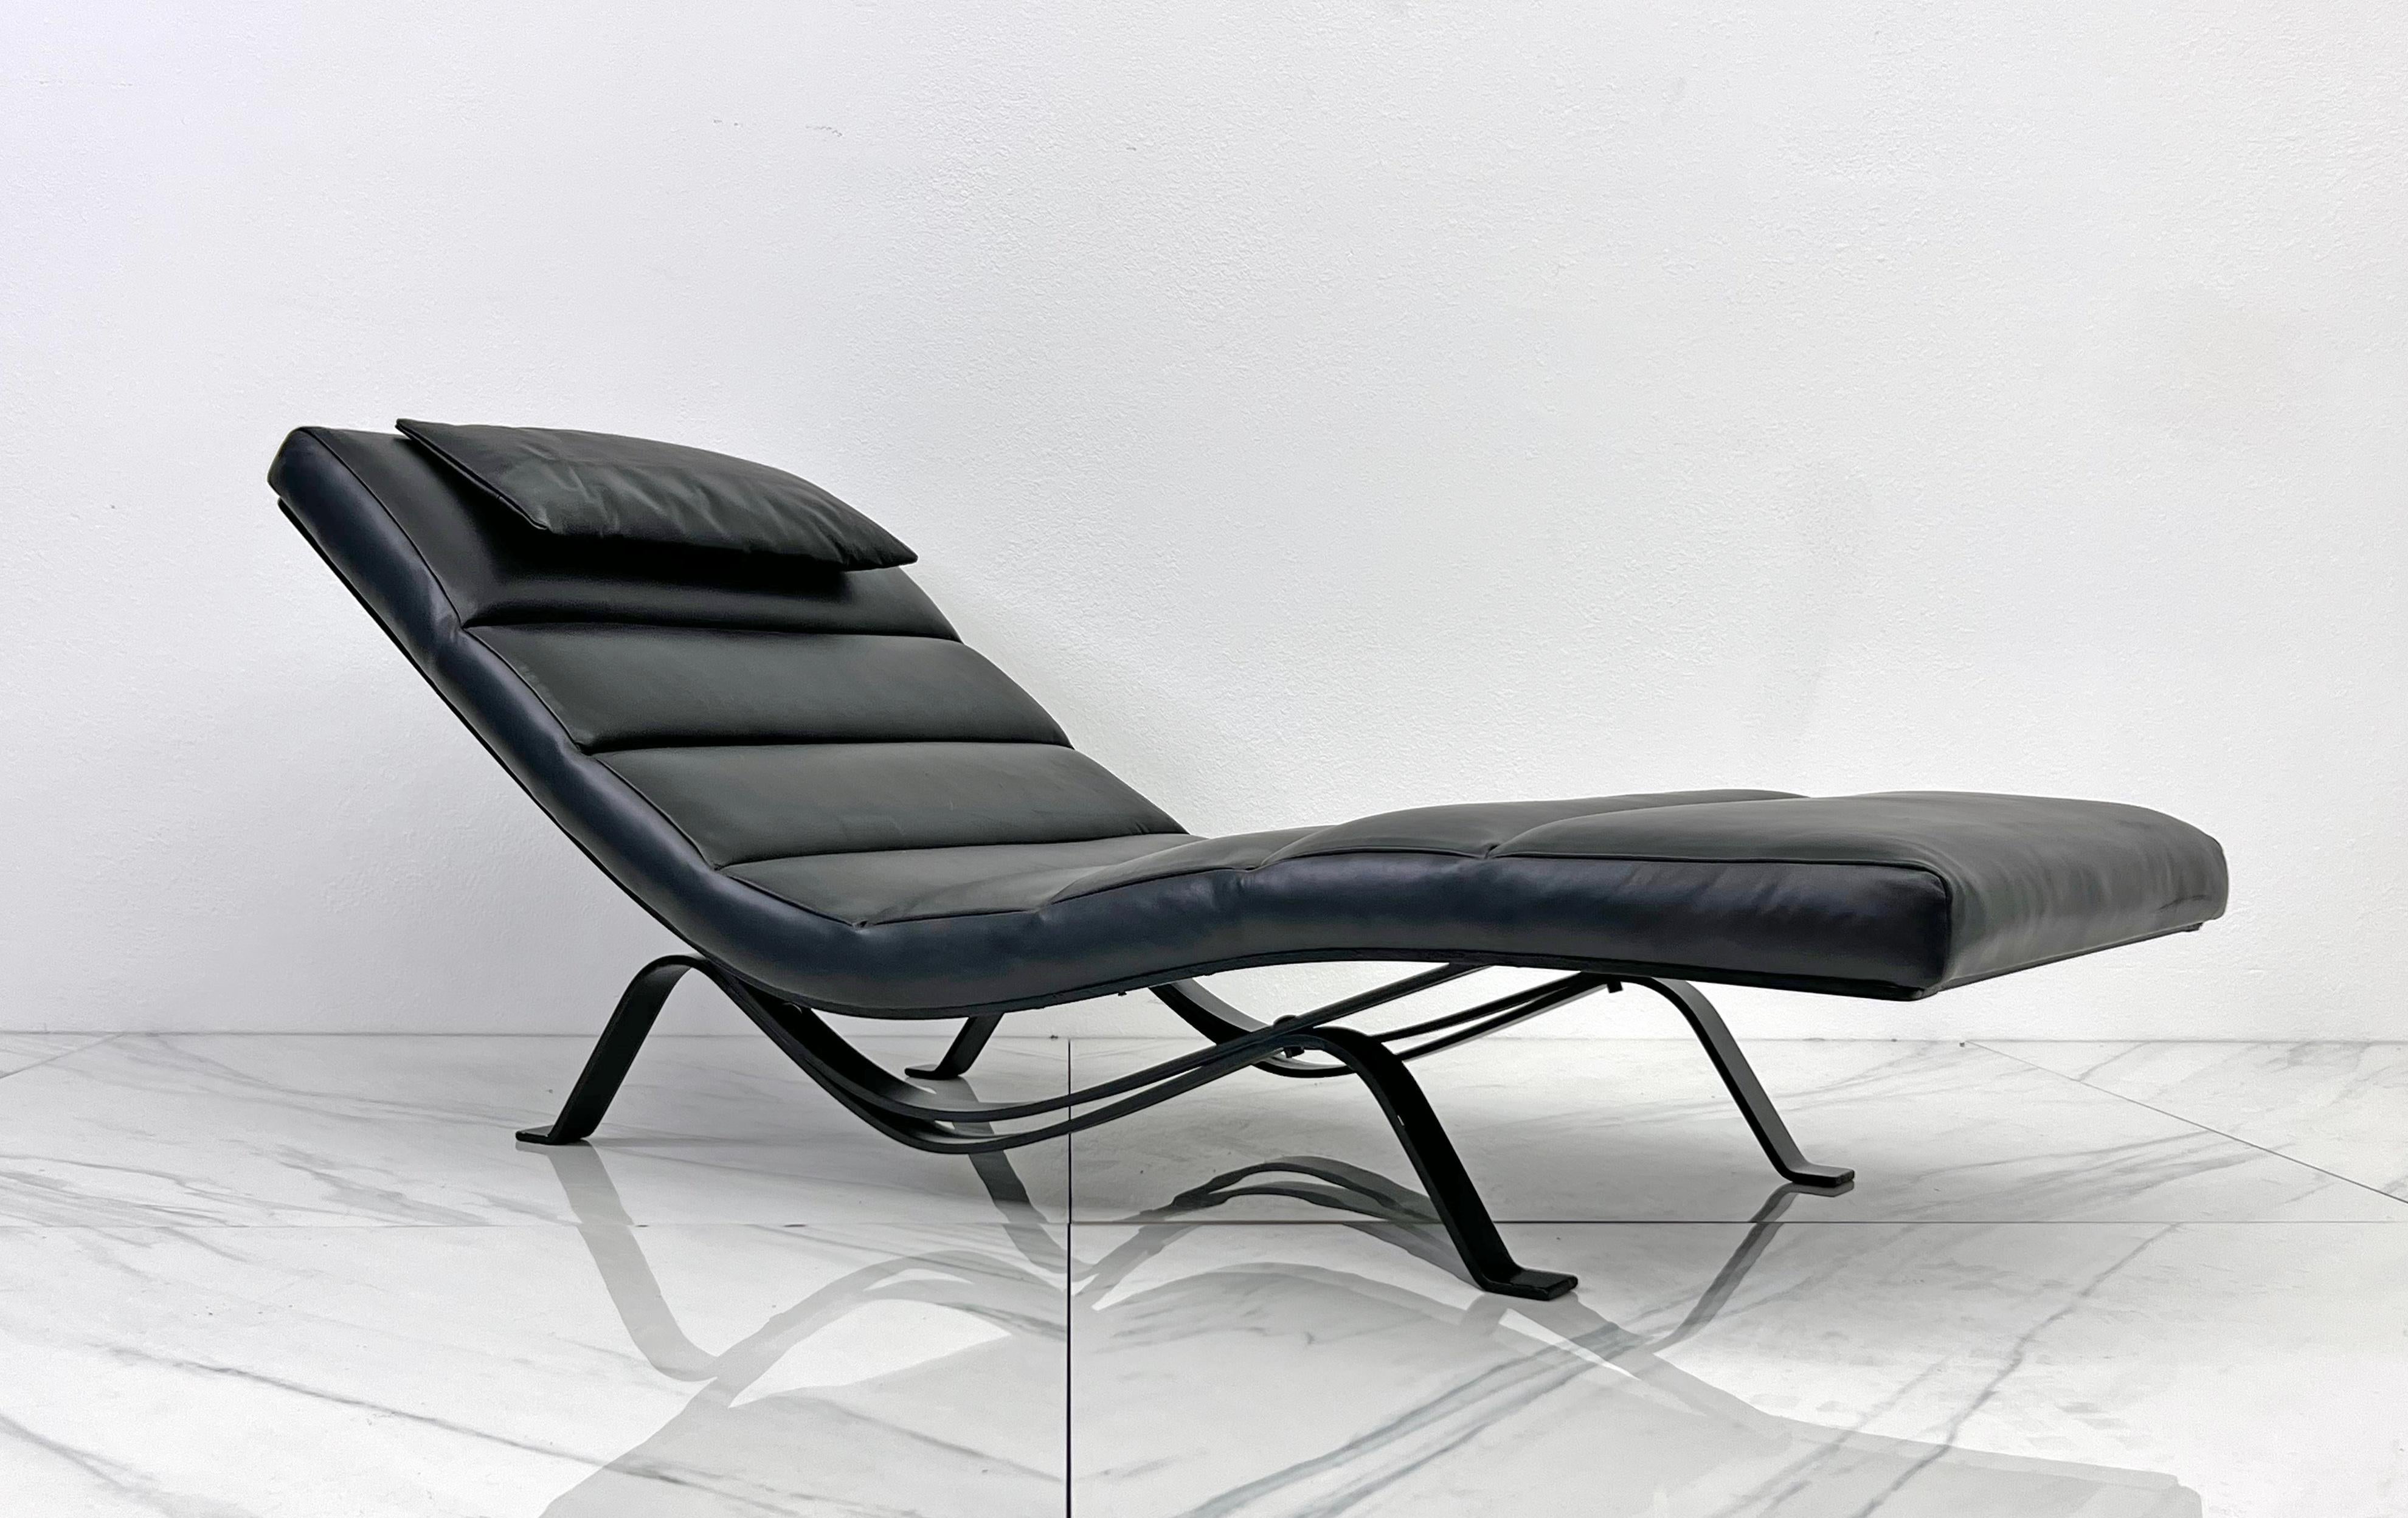 Steel Early Rare Prototype for N° 5490 Chaise Lounge, George Nelson, 1953 For Sale